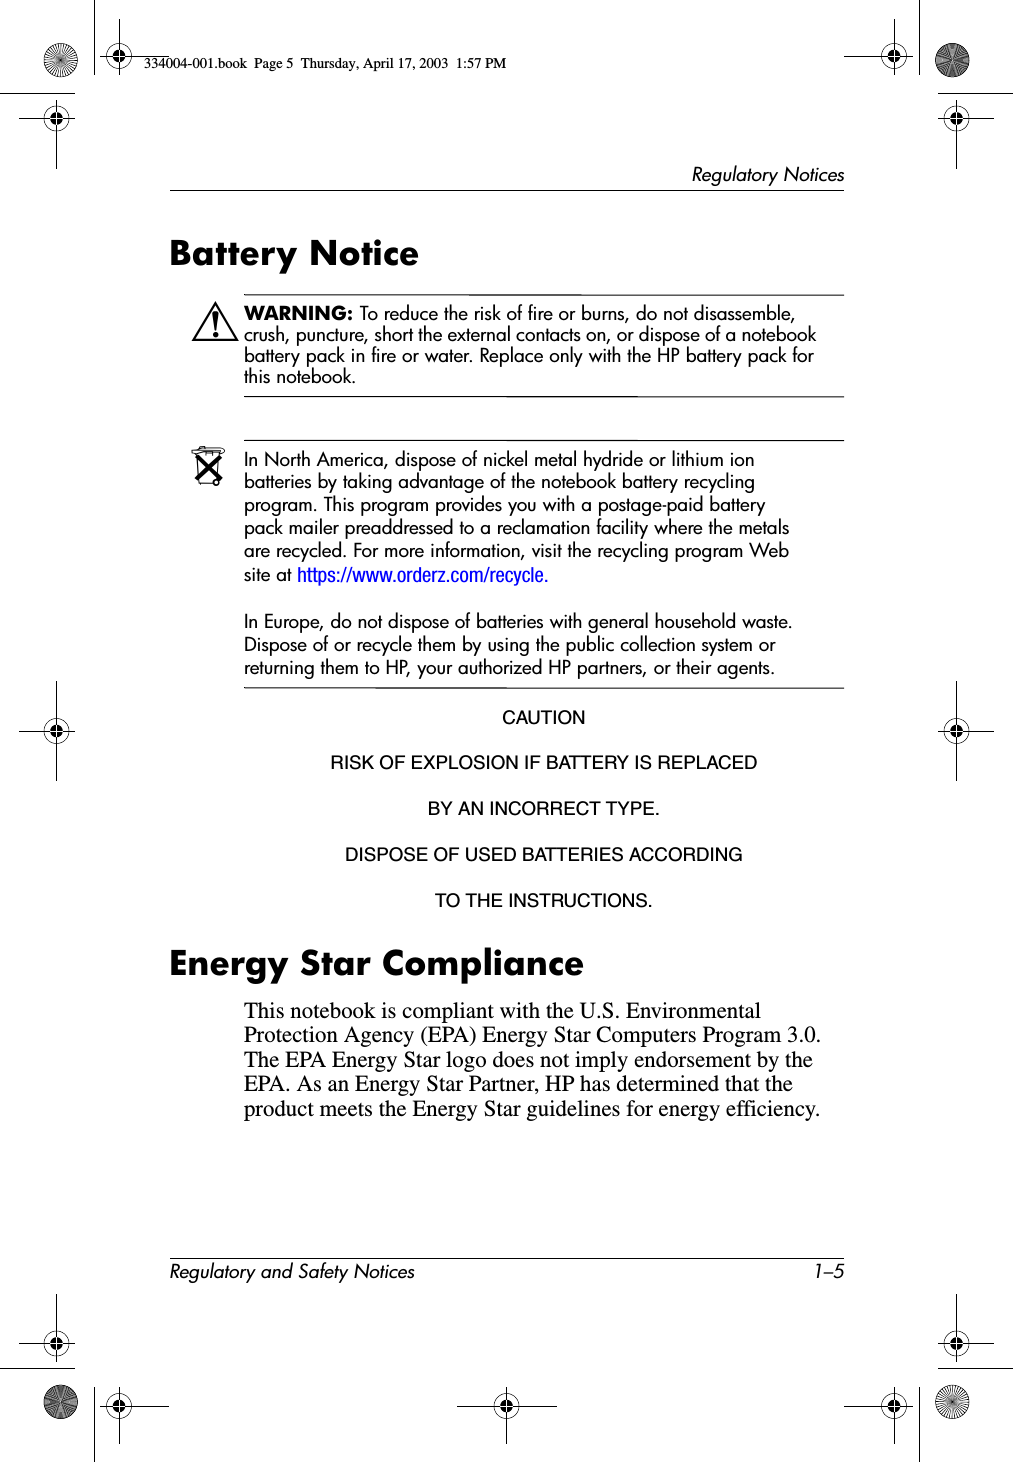 Regulatory NoticesRegulatory and Safety Notices 1–5Battery NoticeÅWARNING: To reduce the risk of fire or burns, do not disassemble, crush, puncture, short the external contacts on, or dispose of a notebook battery pack in fire or water. Replace only with the HP battery pack for this notebook.NIn North America, dispose of nickel metal hydride or lithium ion batteries by taking advantage of the notebook battery recycling program. This program provides you with a postage-paid battery pack mailer preaddressed to a reclamation facility where the metals are recycled. For more information, visit the recycling program Web site at https://www.orderz.com/recycle.In Europe, do not dispose of batteries with general household waste. Dispose of or recycle them by using the public collection system or returning them to HP, your authorized HP partners, or their agents.CAUTIONRISK OF EXPLOSION IF BATTERY IS REPLACEDBY AN INCORRECT TYPE.DISPOSE OF USED BATTERIES ACCORDINGTO THE INSTRUCTIONS.Energy Star ComplianceThis notebook is compliant with the U.S. Environmental Protection Agency (EPA) Energy Star Computers Program 3.0. The EPA Energy Star logo does not imply endorsement by the EPA. As an Energy Star Partner, HP has determined that the product meets the Energy Star guidelines for energy efficiency.334004-001.book  Page 5  Thursday, April 17, 2003  1:57 PM